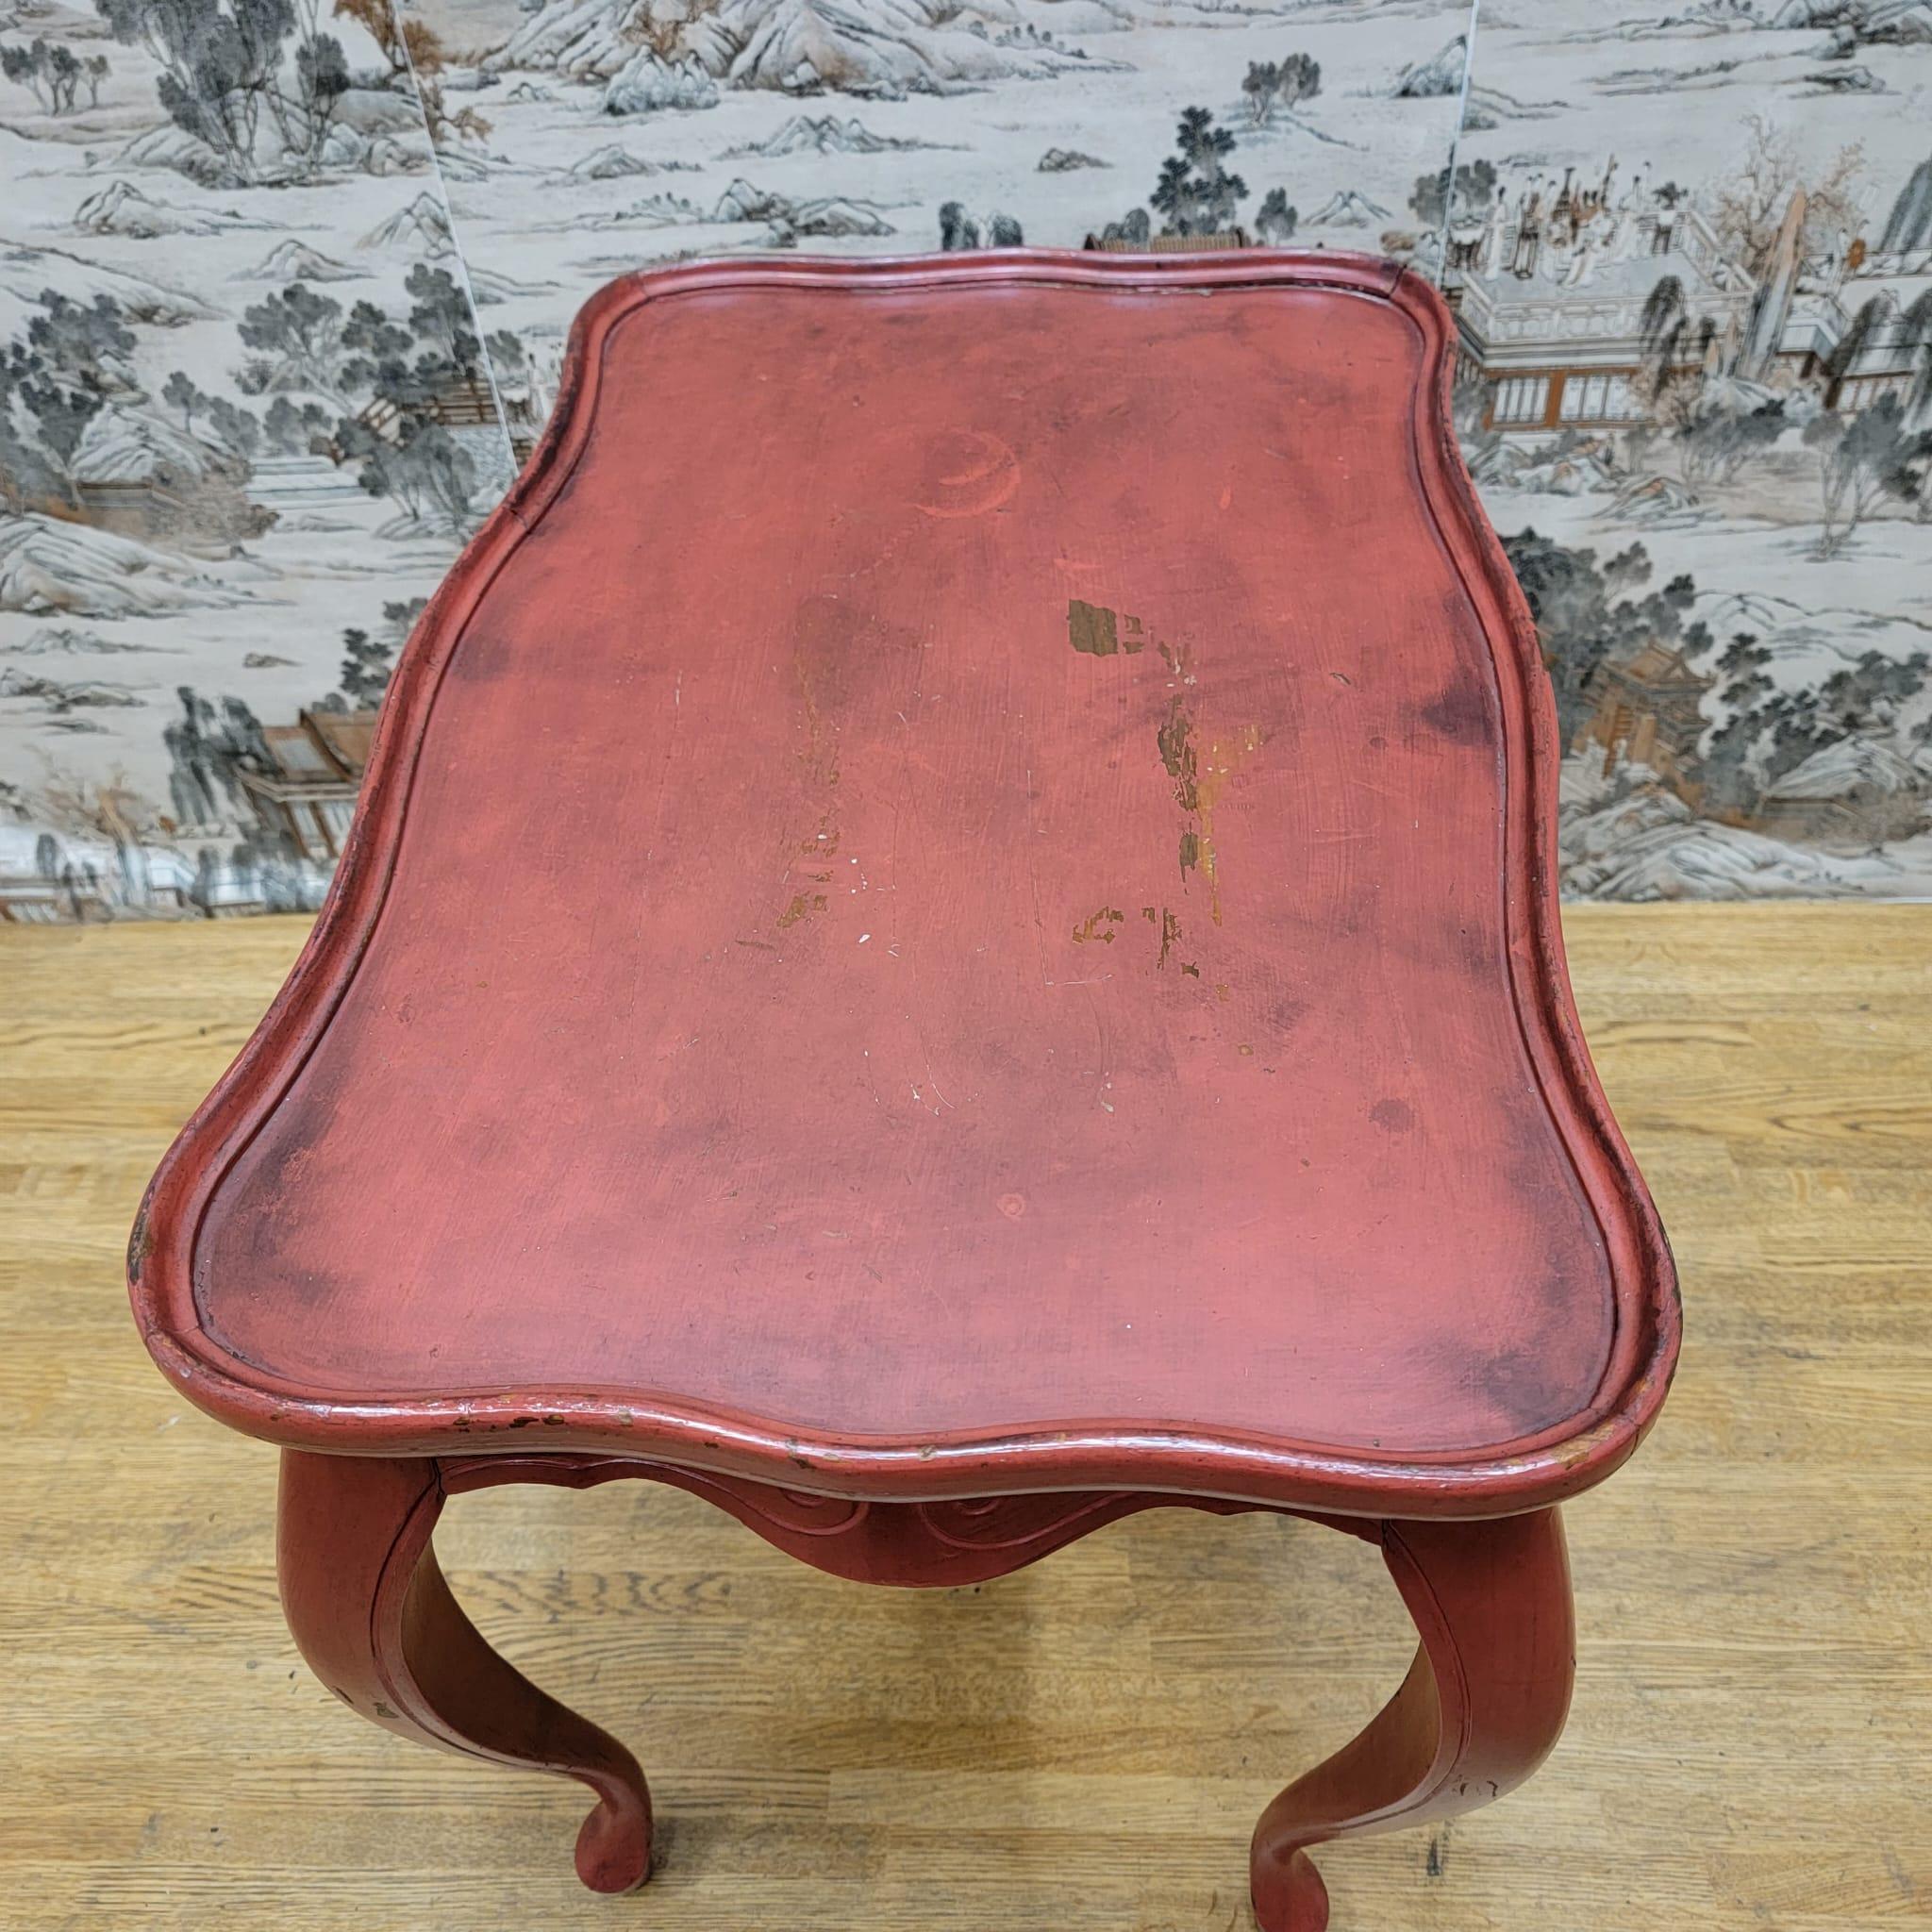 Vintage Red Hand Painted Oak Side Table

This oak side table has been hand painted and has its original color and patina. Made in North Carolina, USA it is a beautiful table to brighten up any room.

Circa: 1980

H: 20